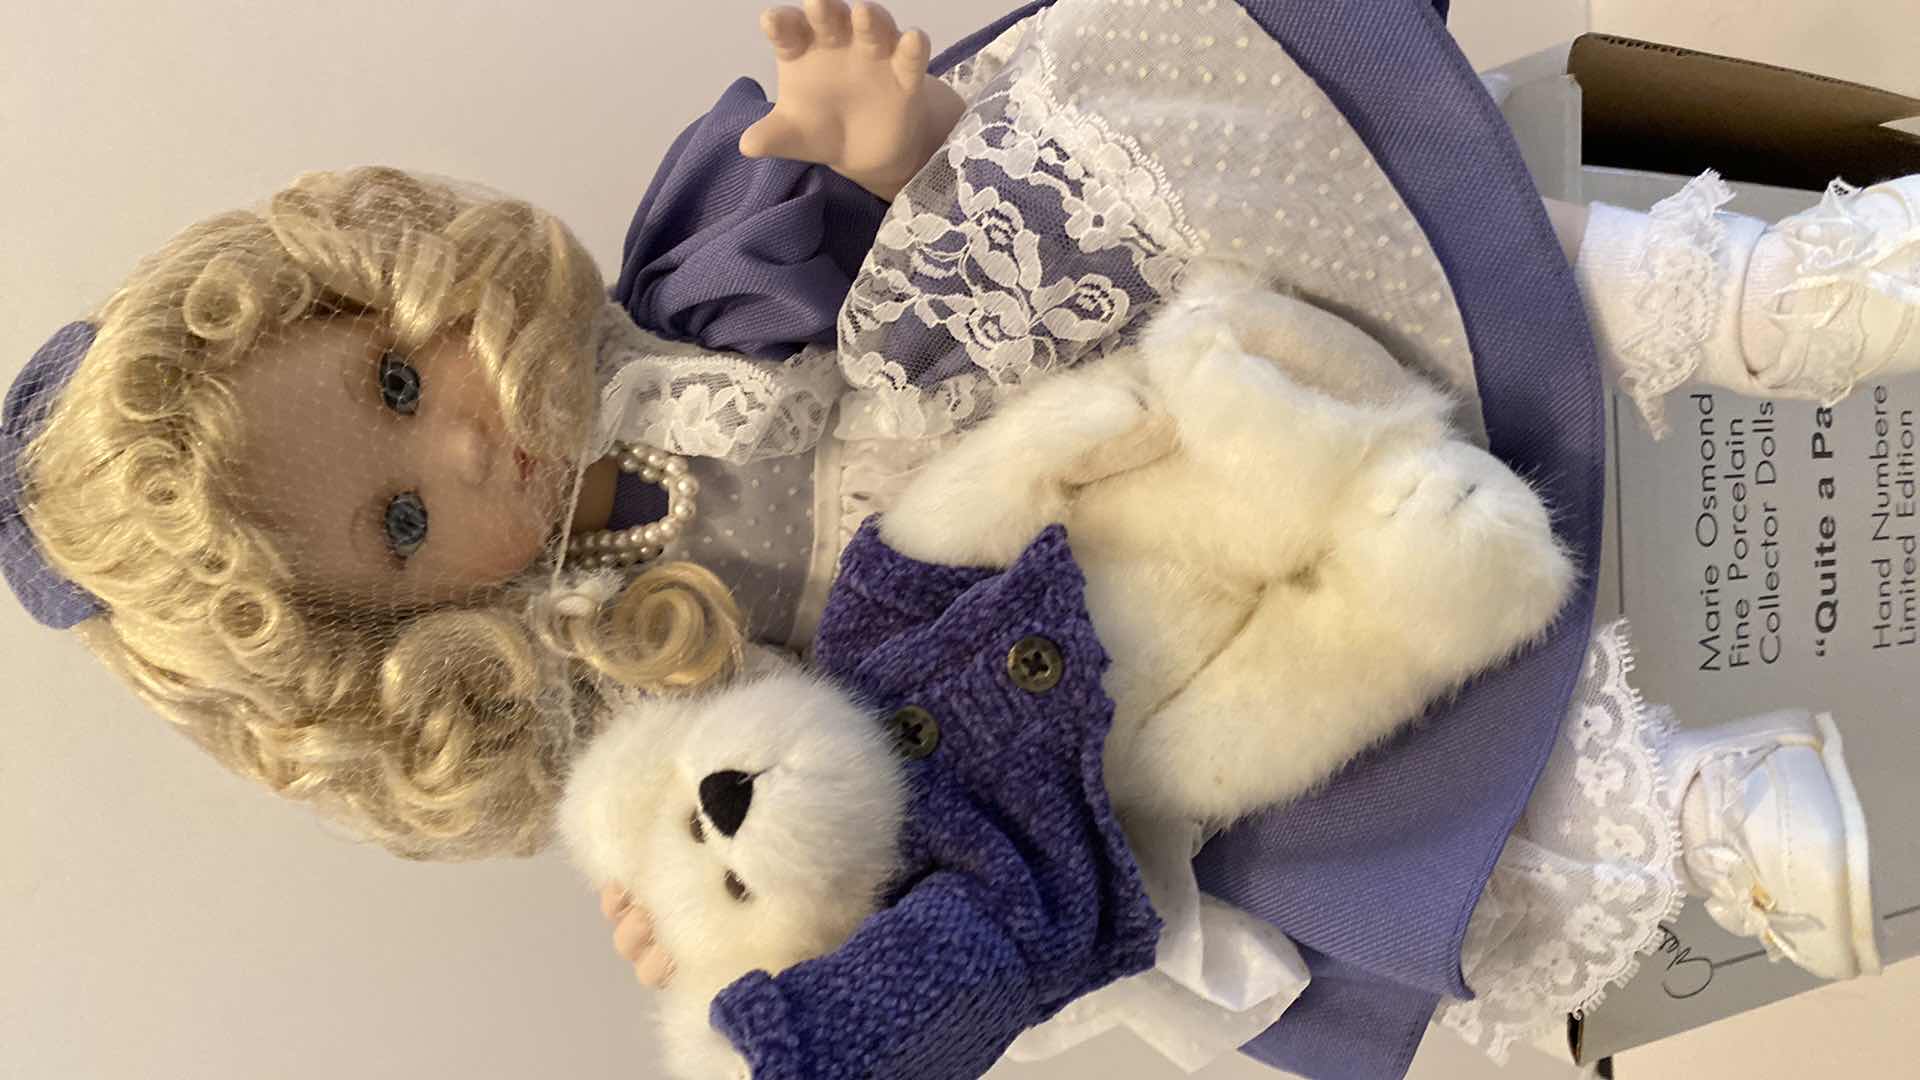 Photo 2 of MARIE OSMOND FINE PORCELAIN SEATED BLOND GIRL DOLL AND BOYDS BEAR COLLECTIBLES DOLL H 15” $60